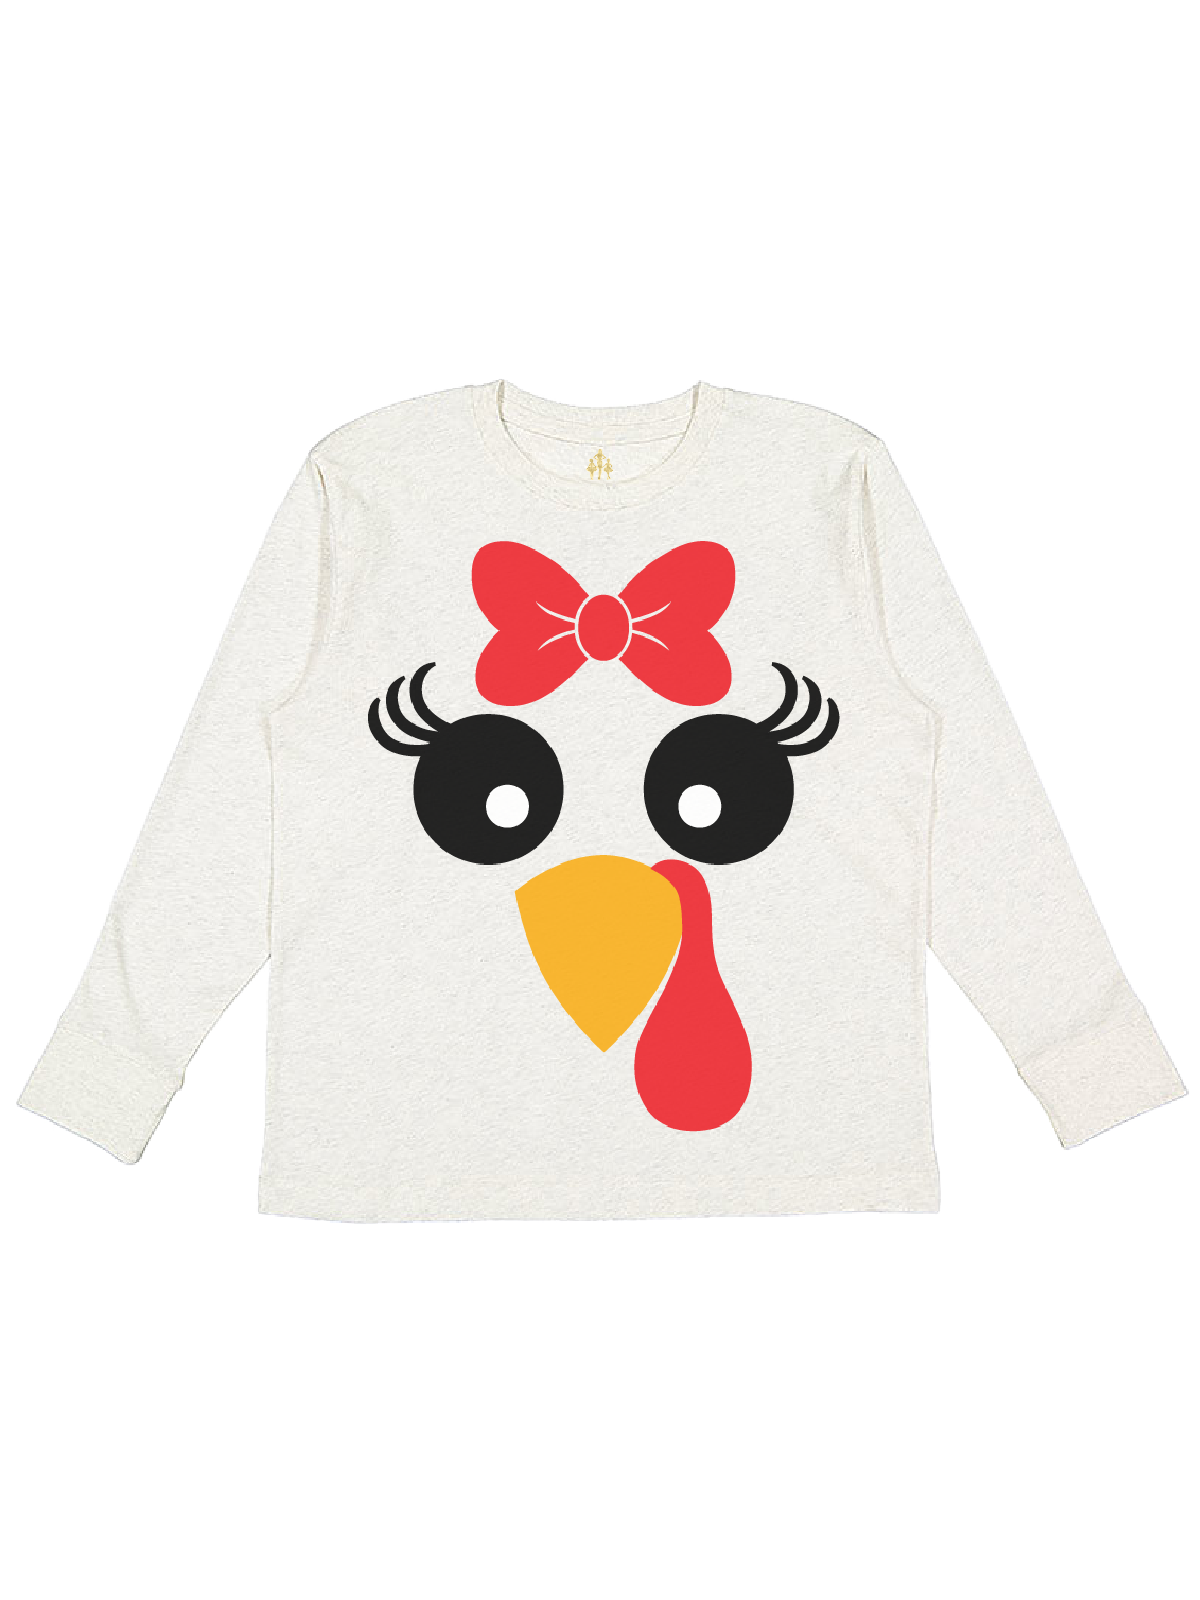 Girly Turkey Face Kids Long Sleeve Thanksgiving Day Shirt in Natural Heather